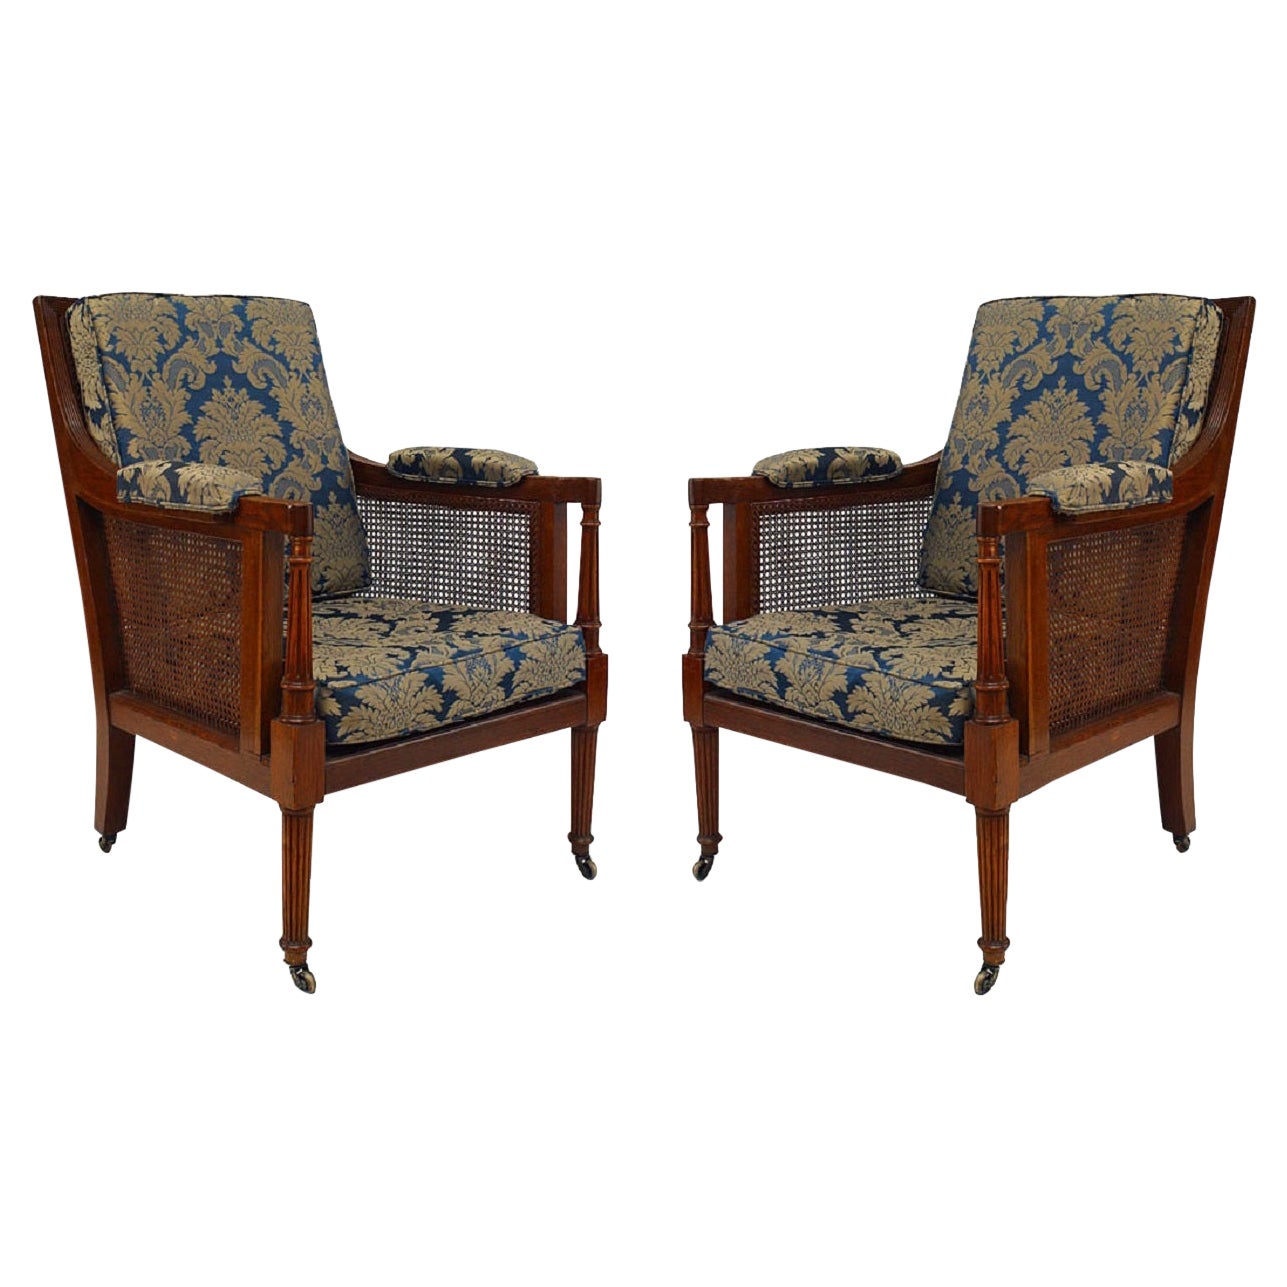 Pair of English Regency Oak Armchairs with Caned Panels and Cushioned Seats